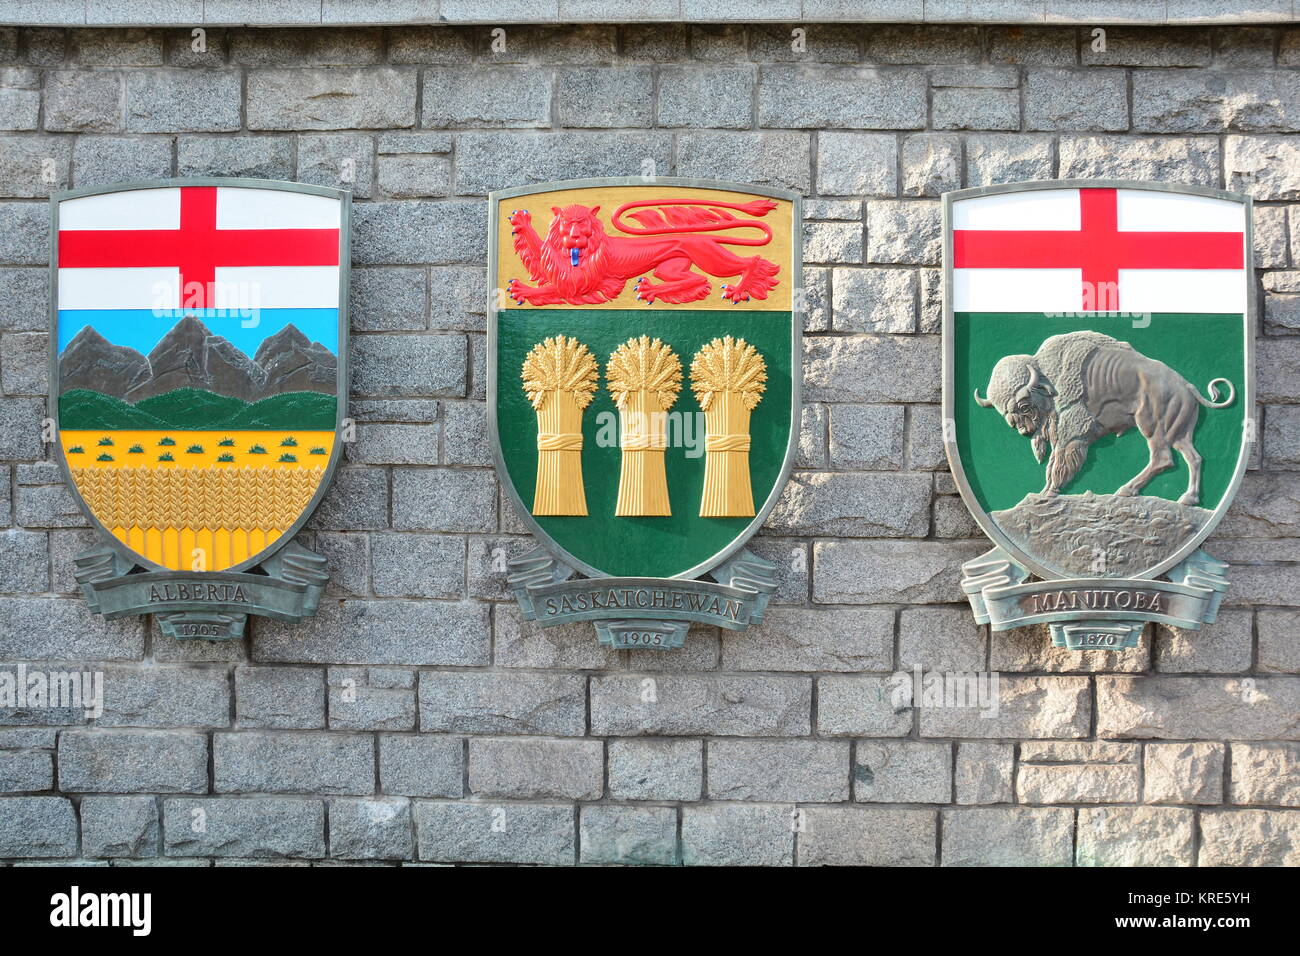 The coats of arms for the provinces of Alberta, Saskatchewan and Manitoba. Stock Photo